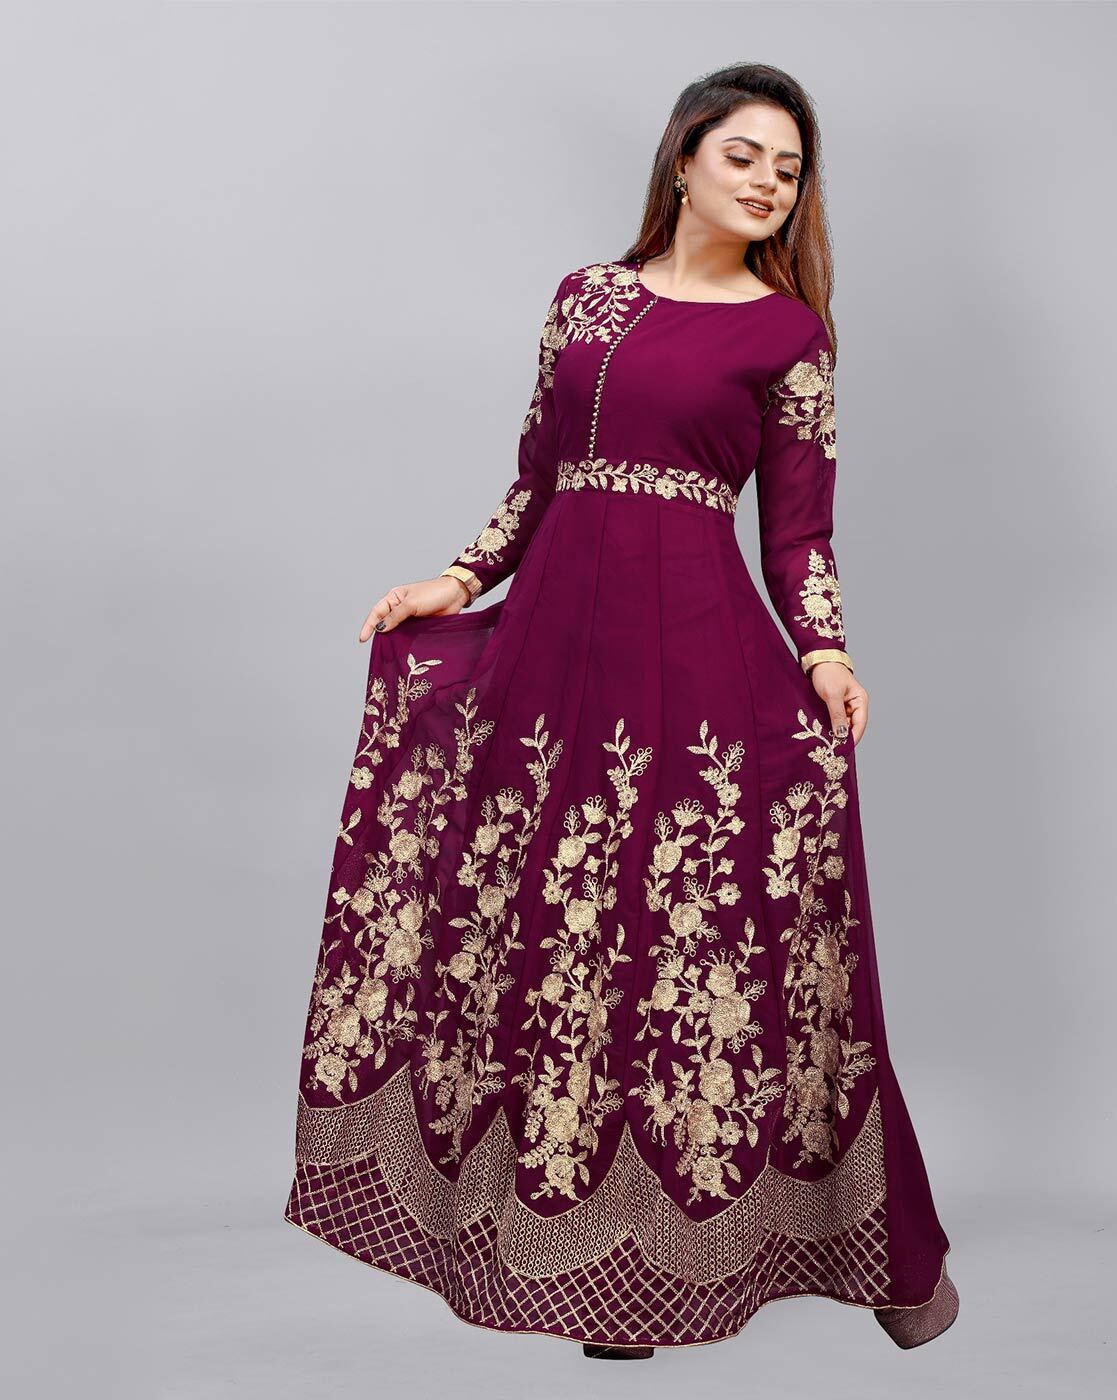 Buy YOYO Fashion Designer Latest Georgette Embroidred Anarkali Salwar Suit  Online at Low Prices in India - Paytmmall.com